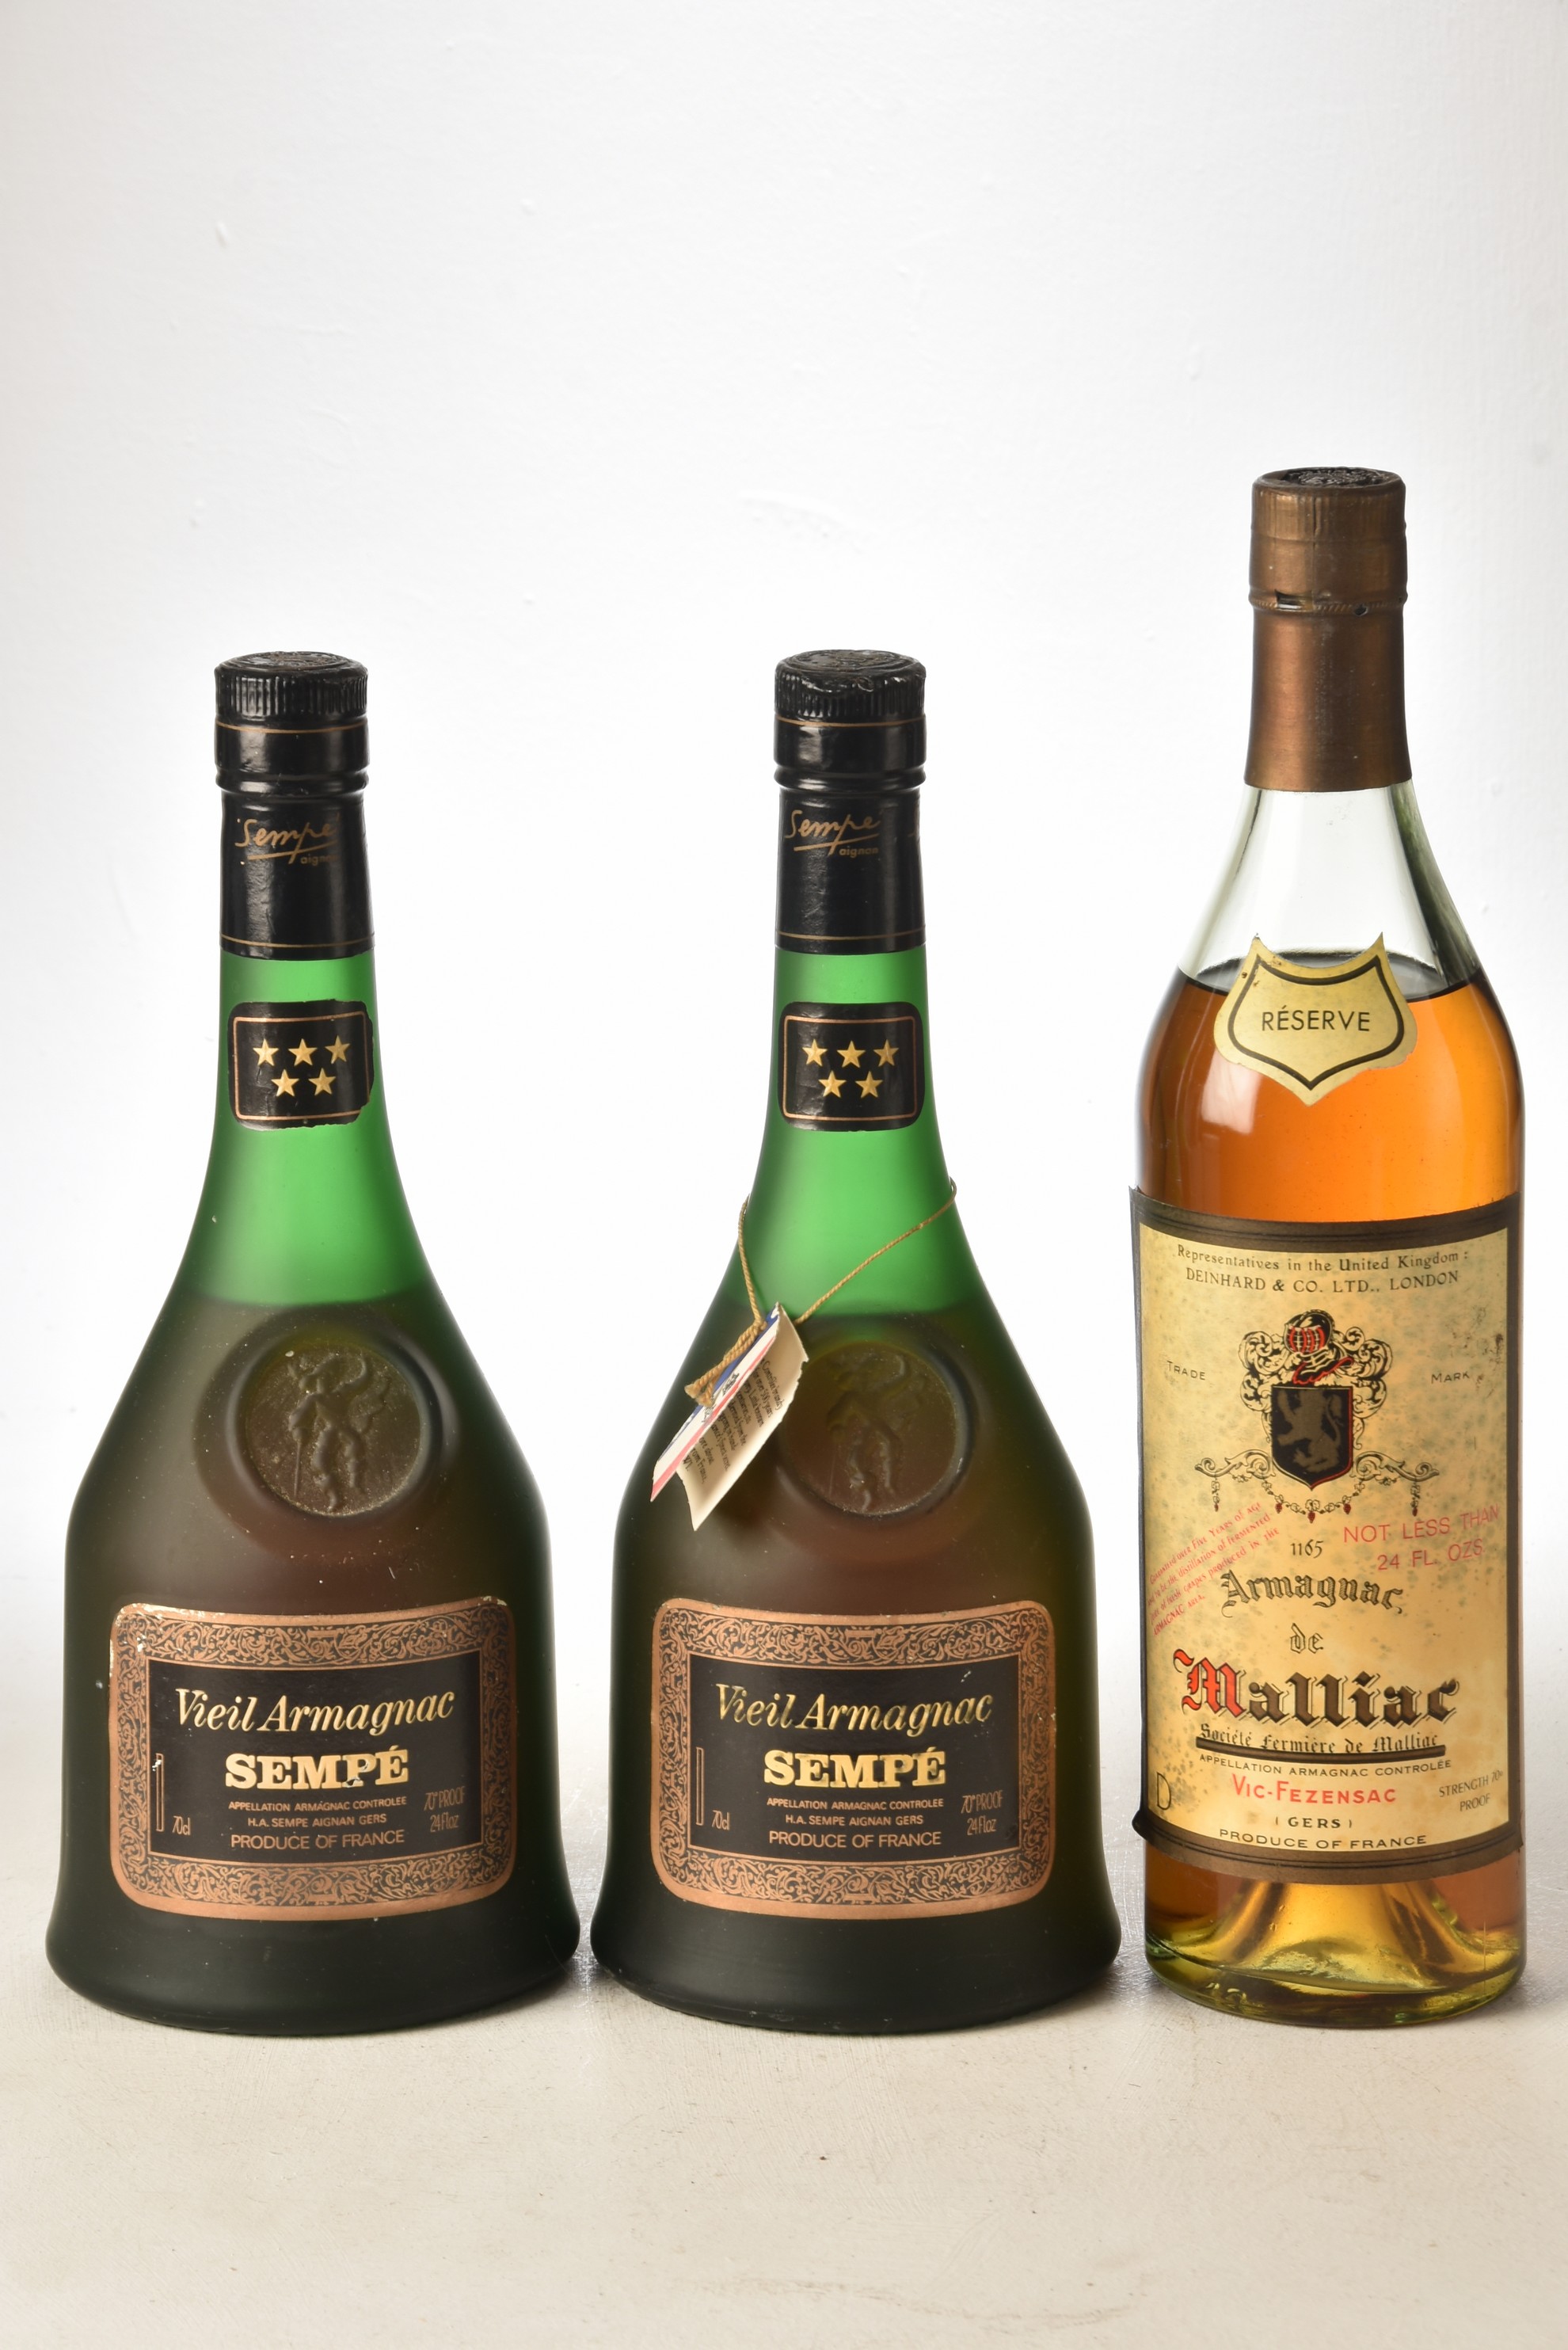 Mixed Armagnacs 3 bts Sempe and Maillac